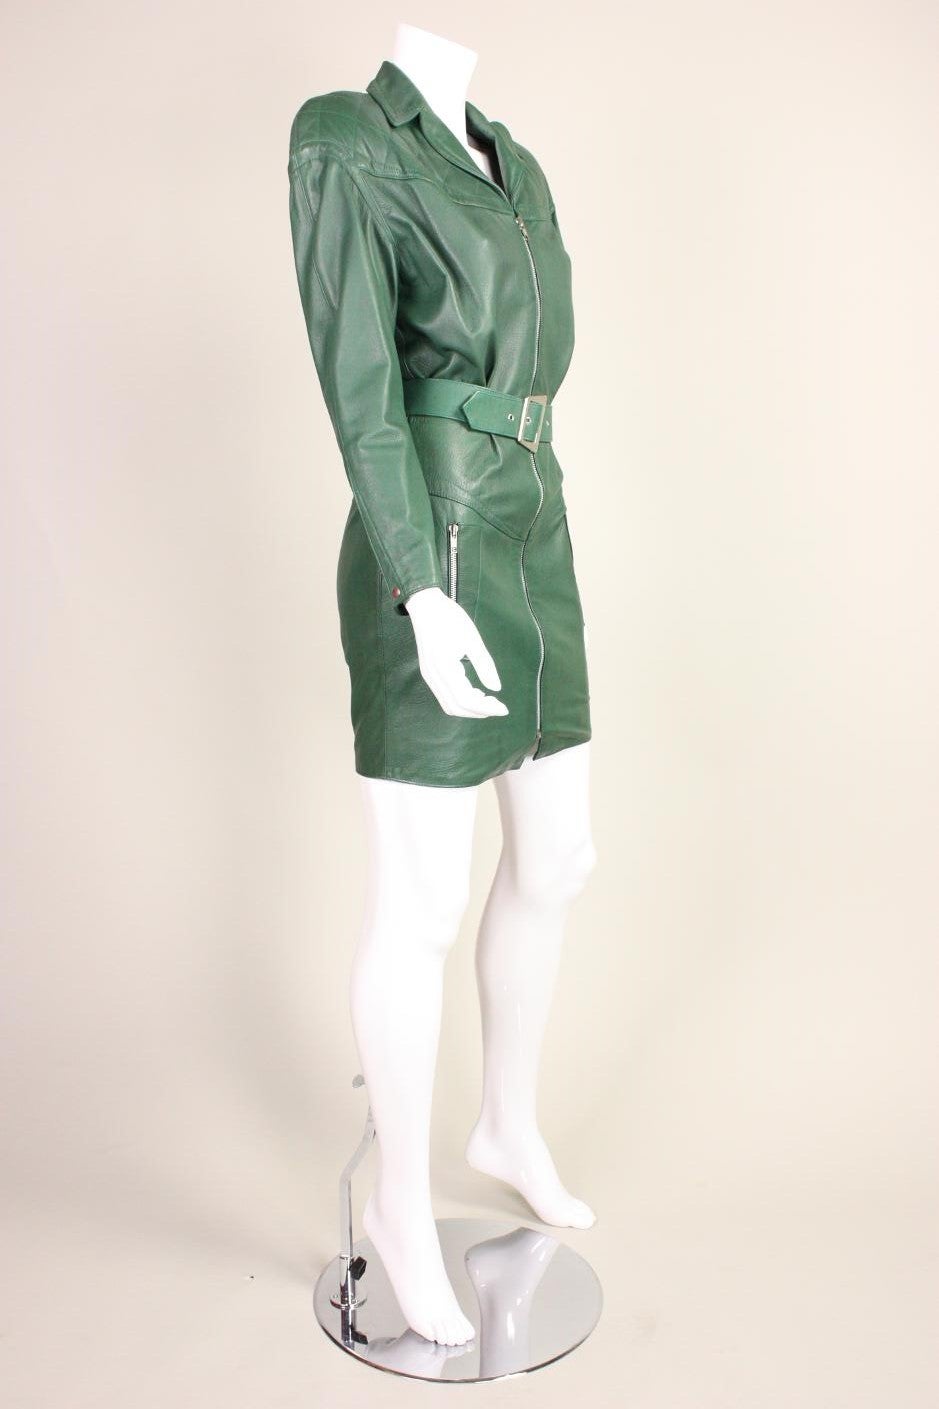 Super sexy Thierry Mugler green leather mini dress dates to the late 1980's through the early 1990's.  It features a zippered front closure, zippered pockets at hip, and is fully lined. Padded shoulders. Detached belt with silver-toned